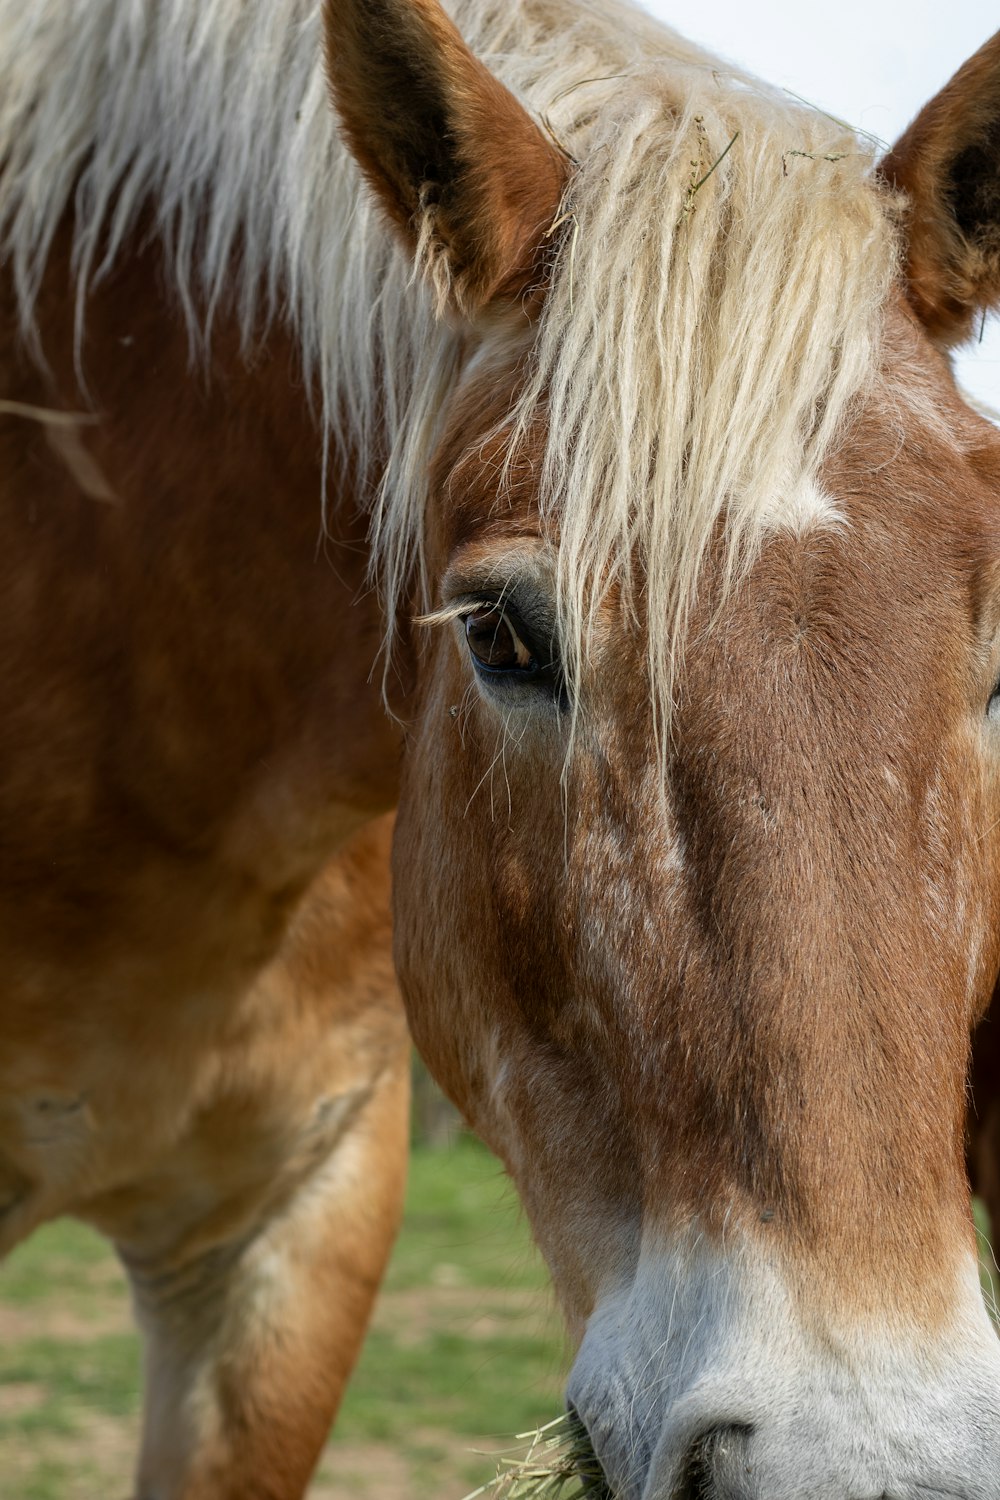 a close up of a horse with a blurry background